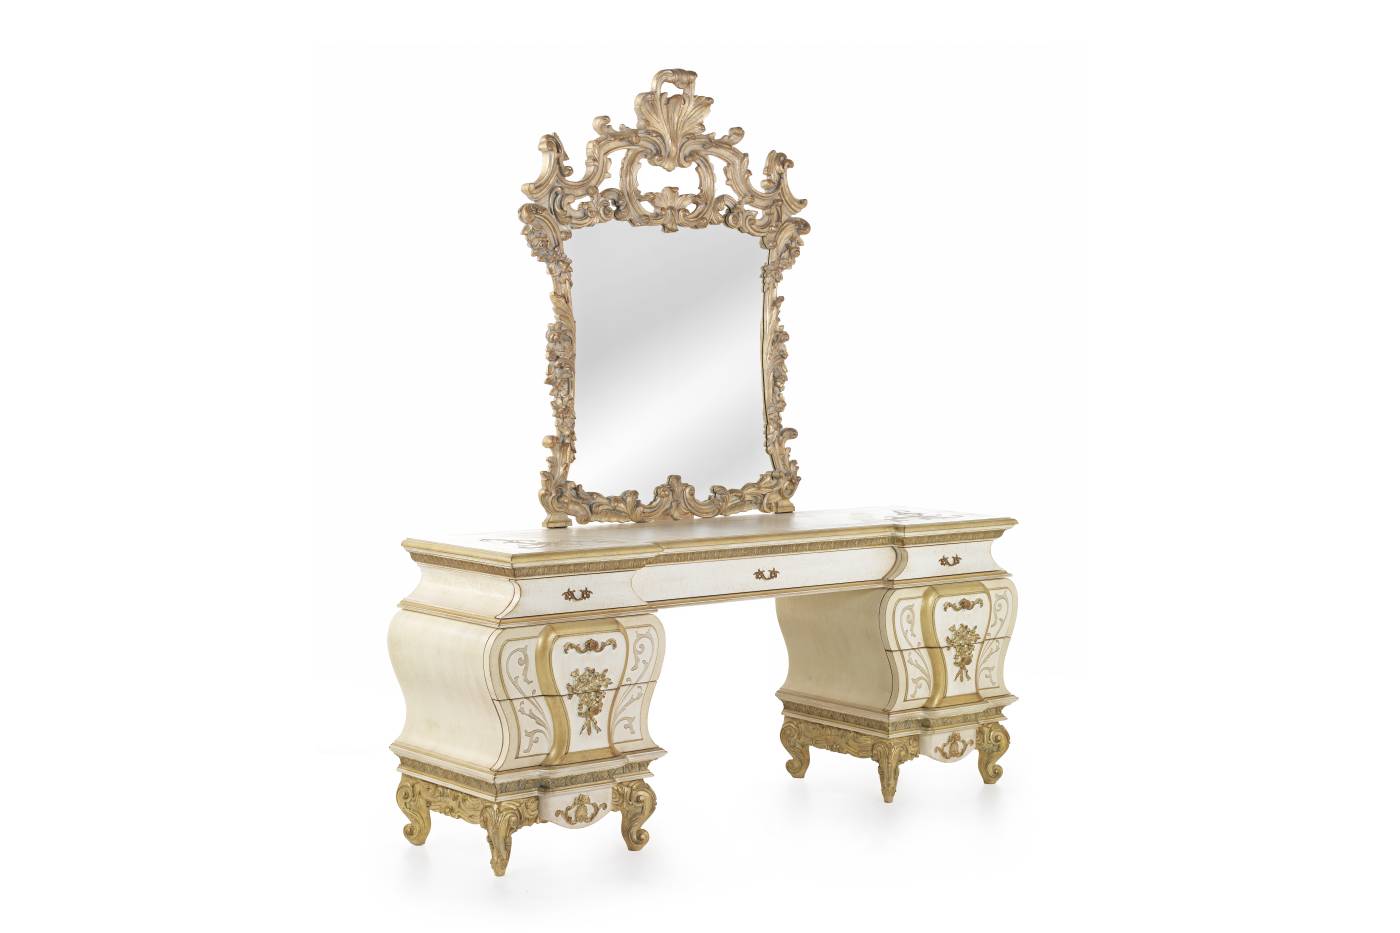 SCARLETT dressing table - Bespoke projects with luxury Made in Italy classic furniture